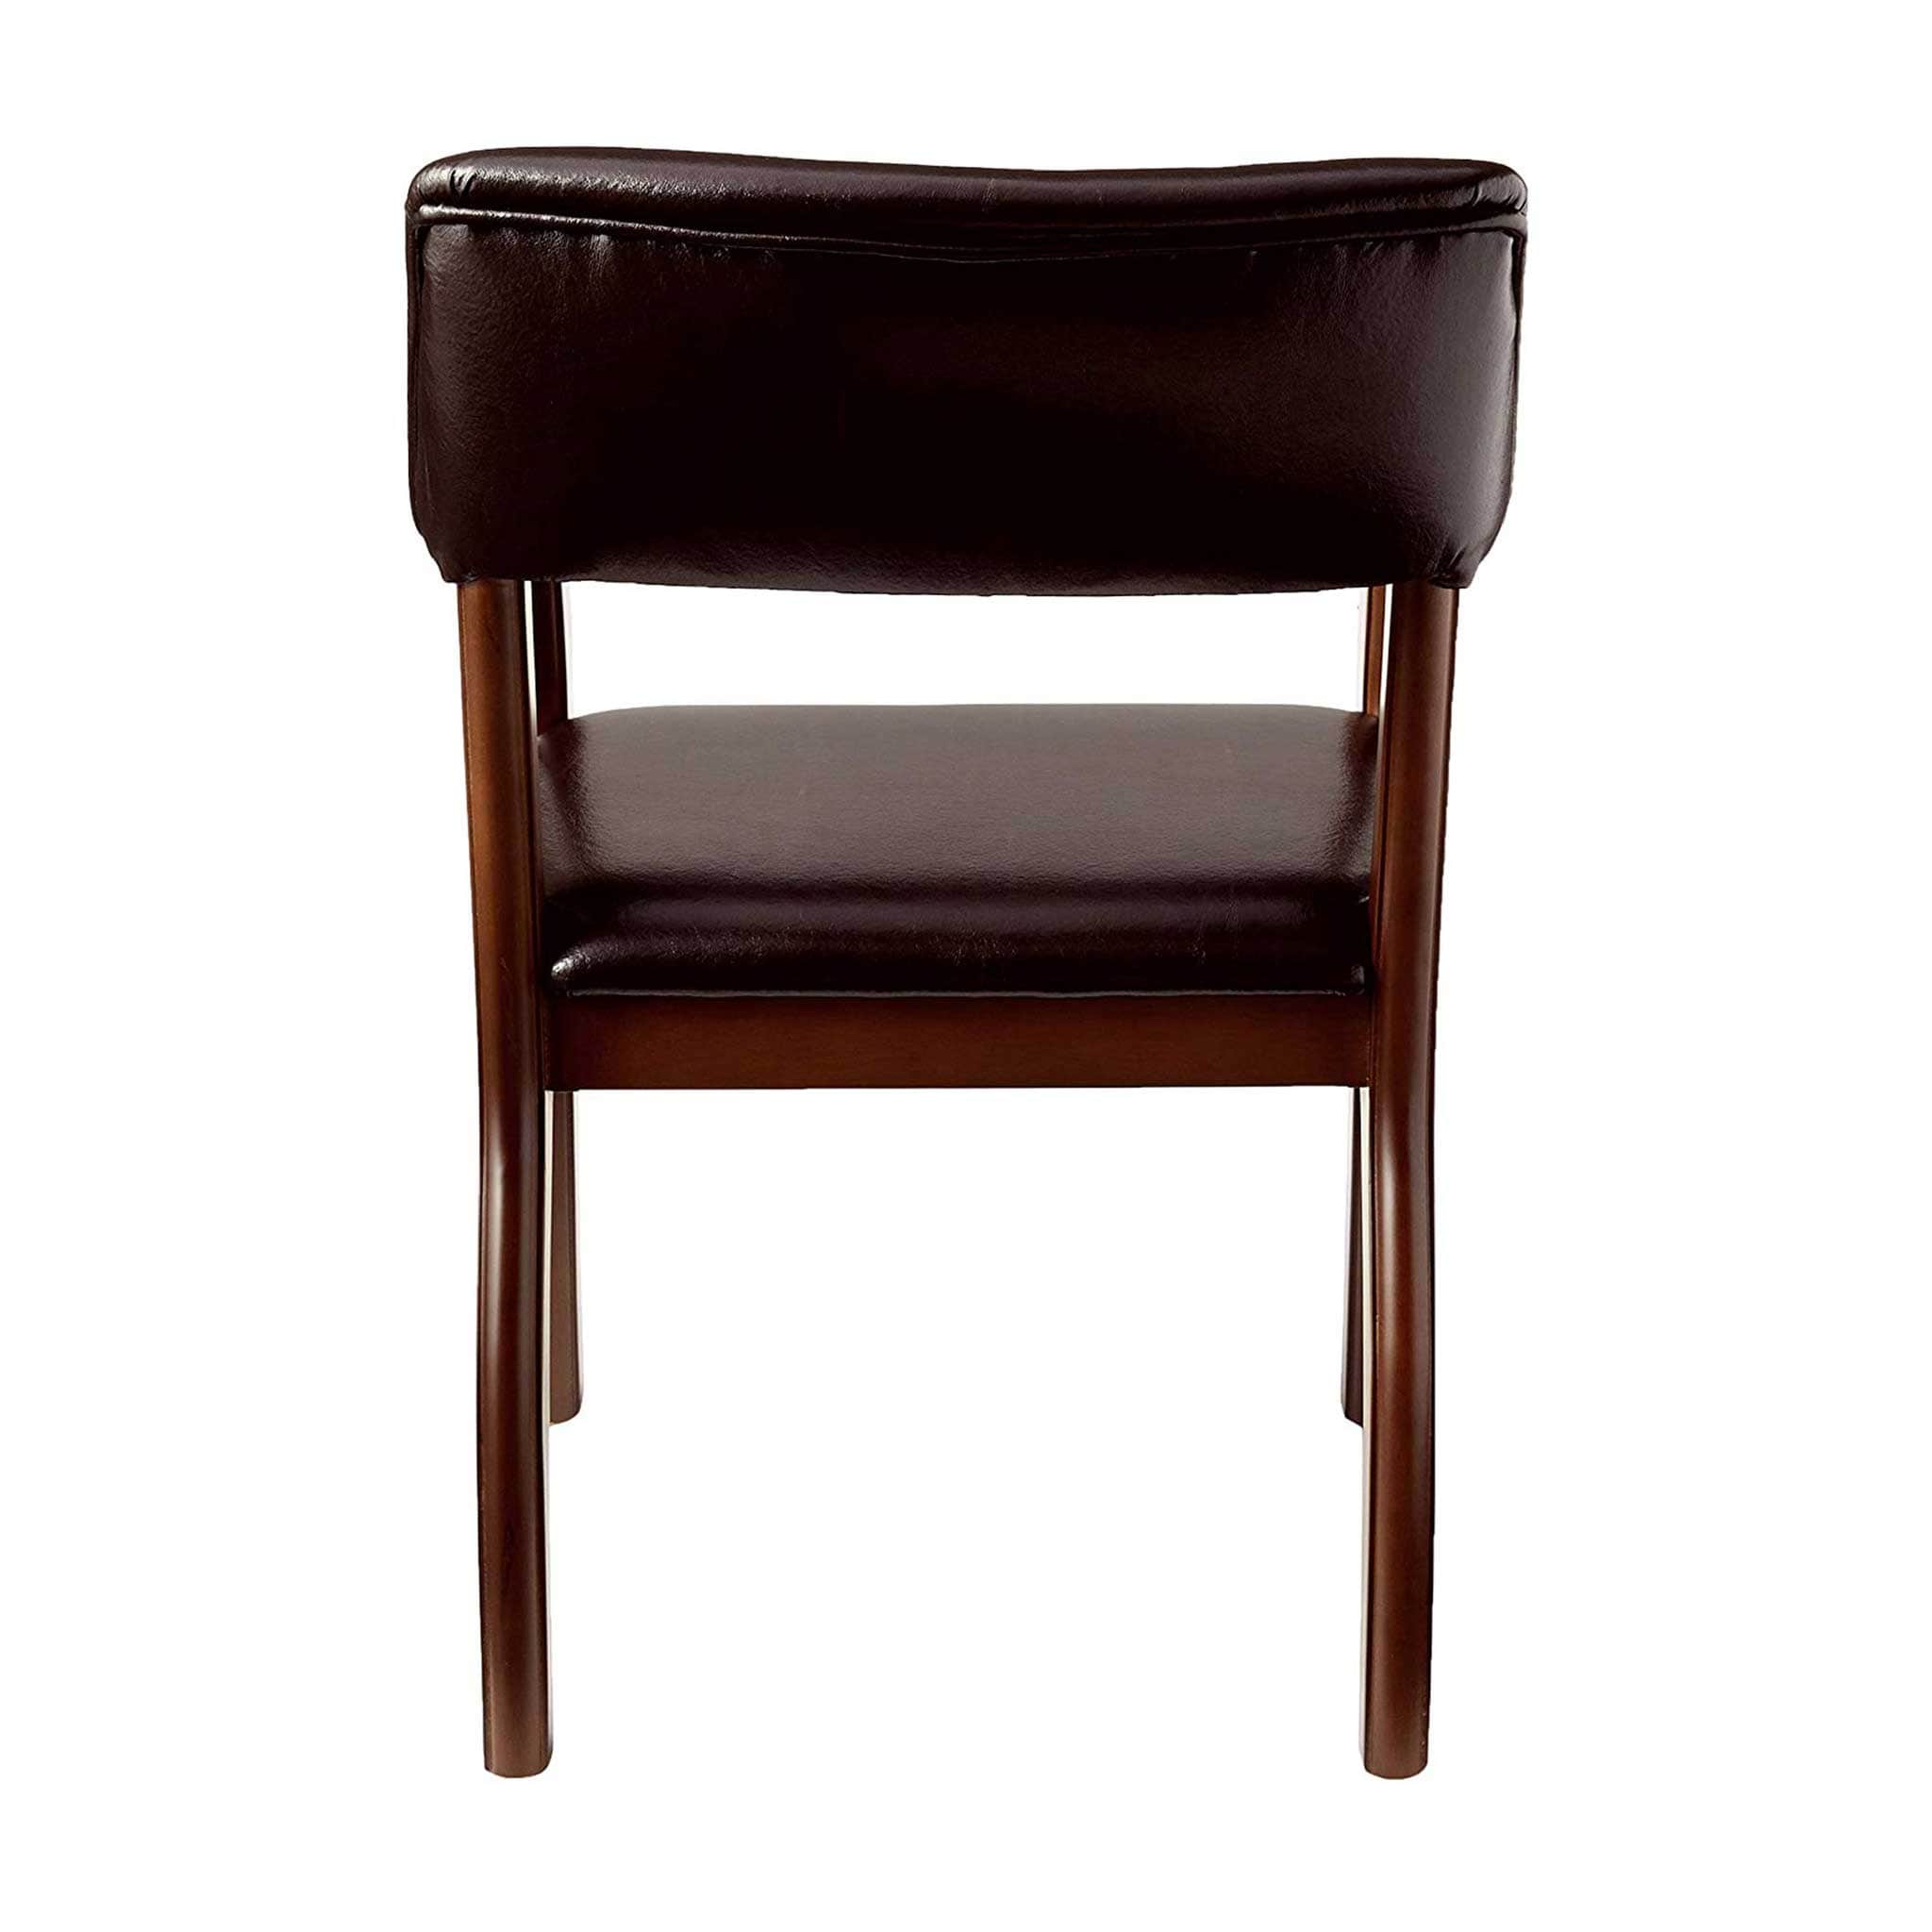 Pirate Brown Wooden Legged Leatherette Chair